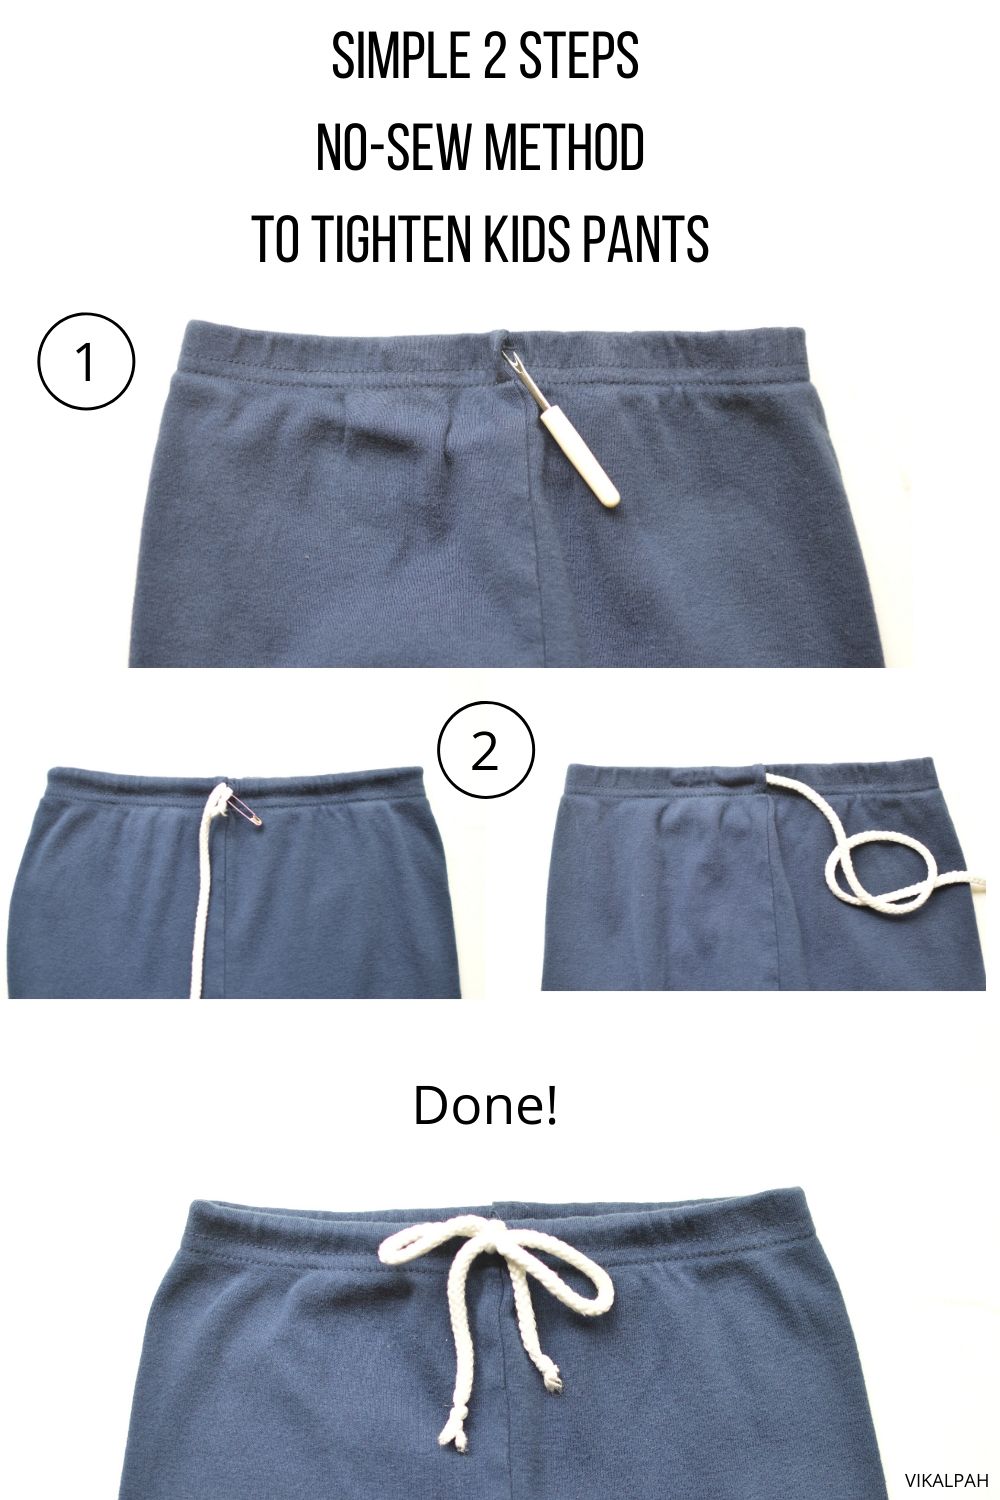 How to Make Pants Bigger With or Without Sewing Machine